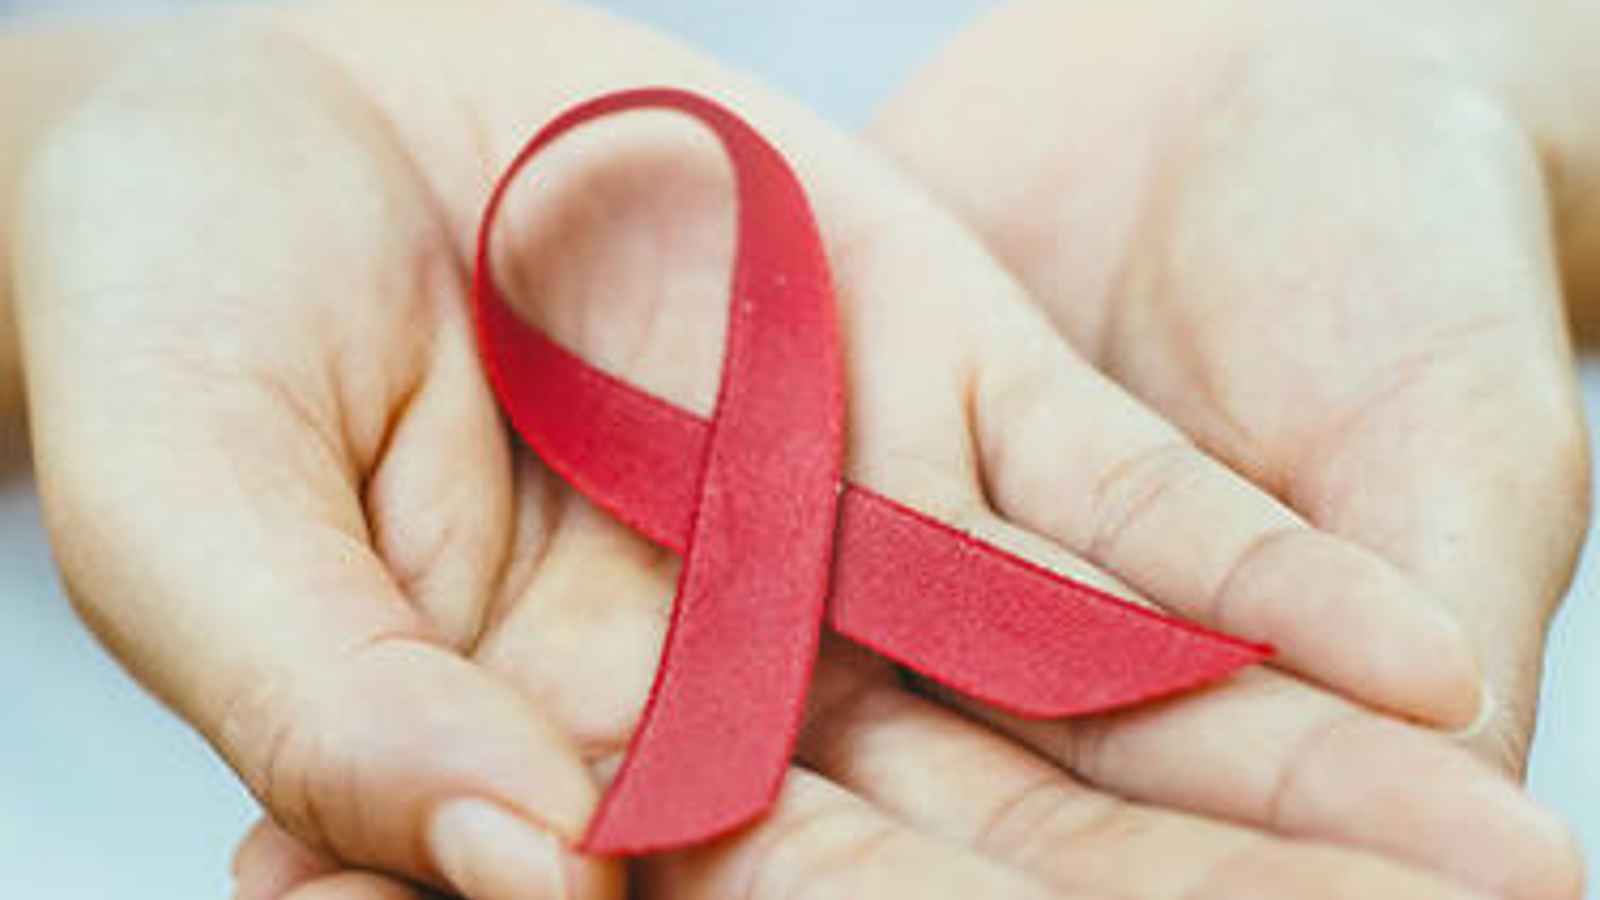 National Latino AIDS Awareness Day 2023: Date, History, Facts, Activities